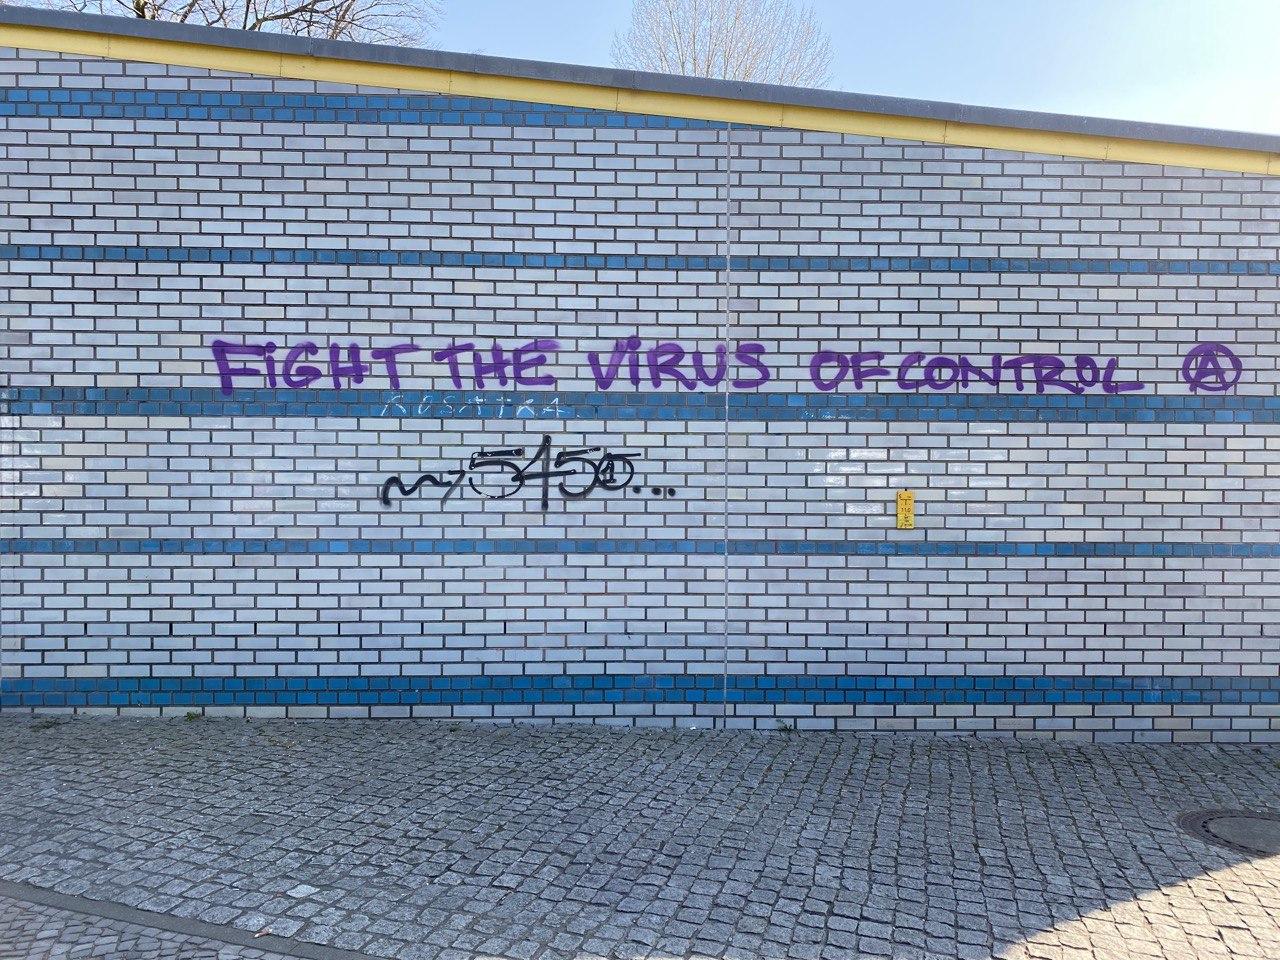 A virus called control: The suspension of constitutional rights in Germany